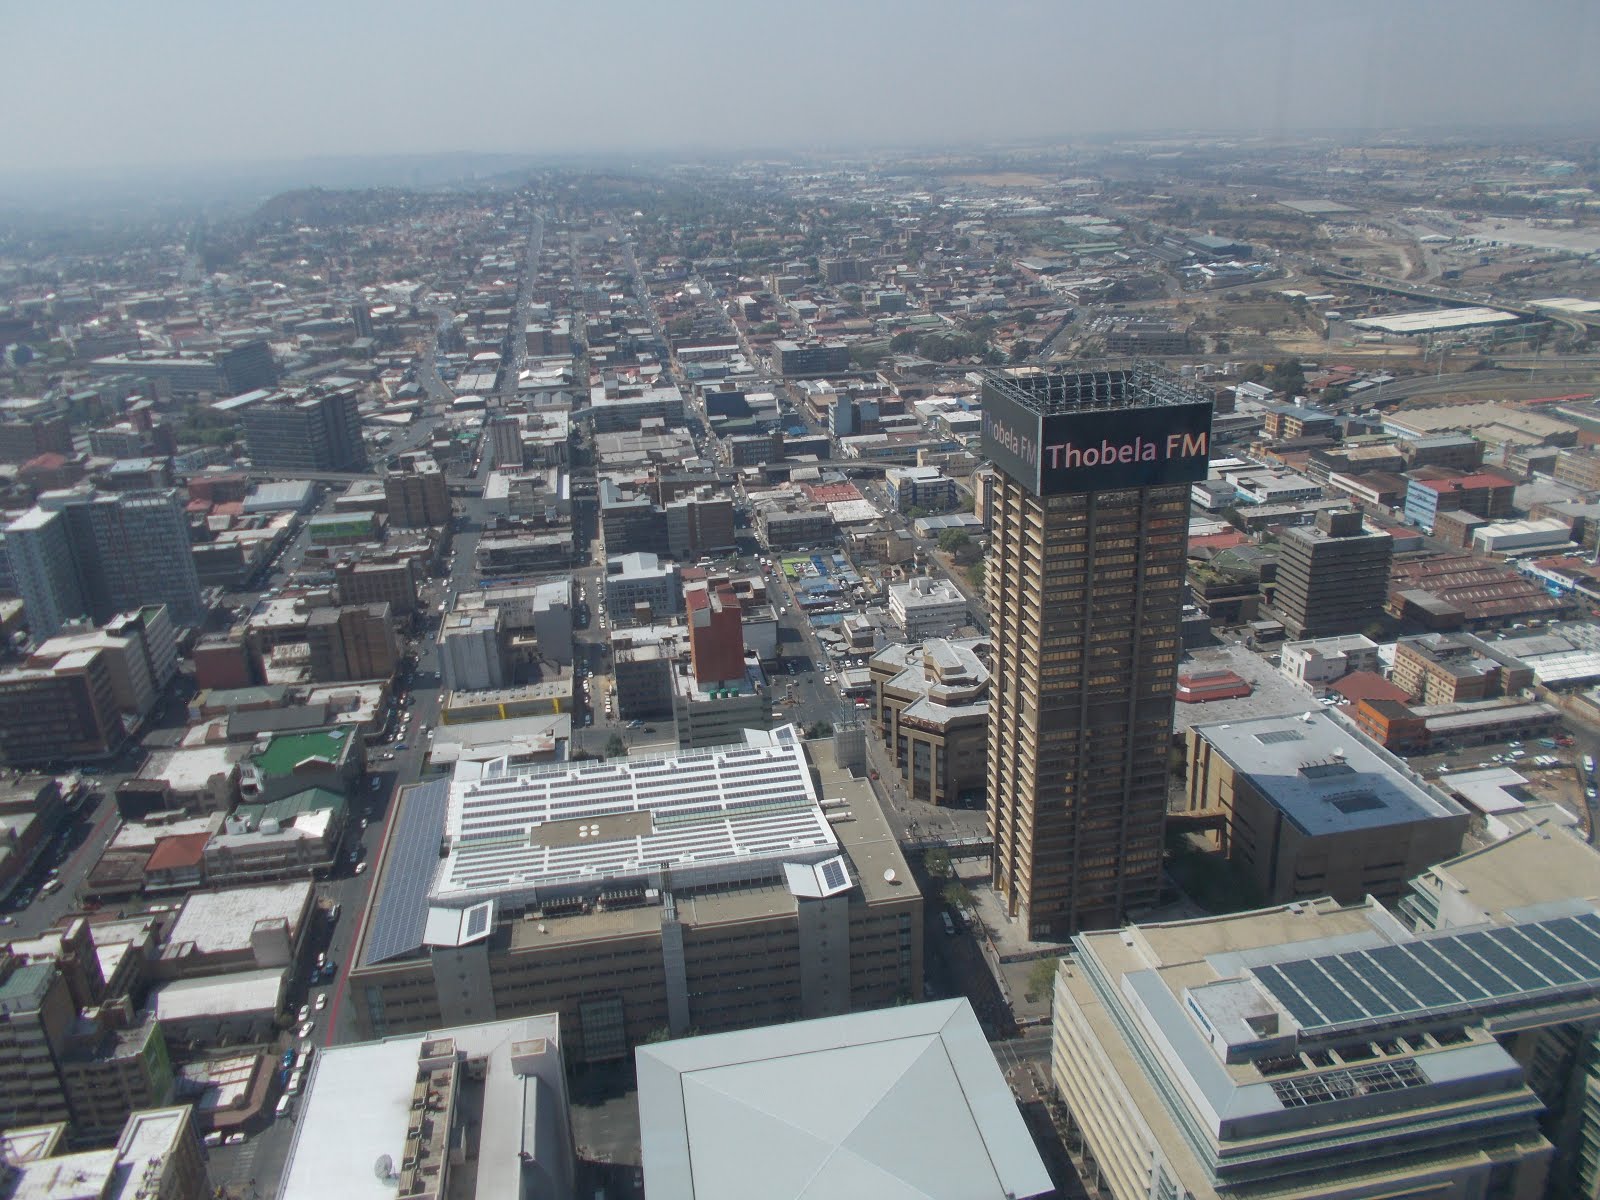 View of Johannesburg from the 50th floor of "CARLTON CENTRE", the tallest building in Africa.